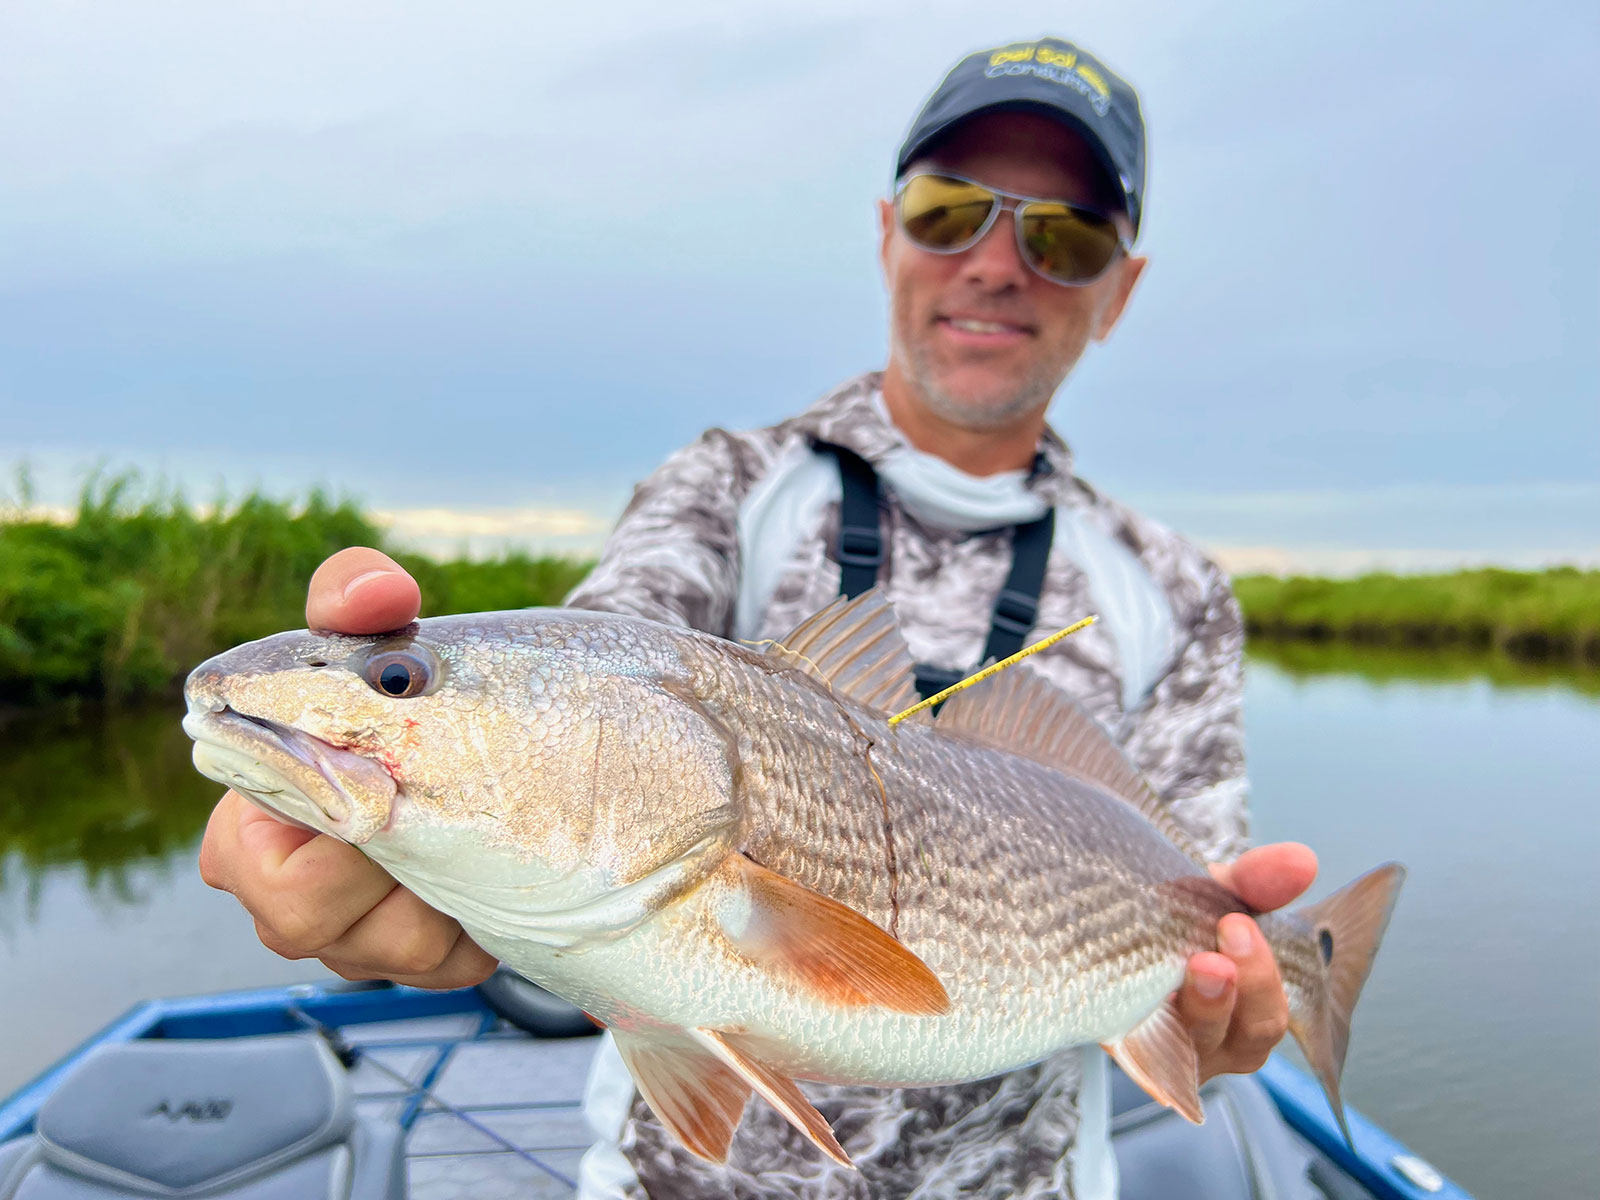 Drum Decline Has Louisiana Anglers Seeing Red